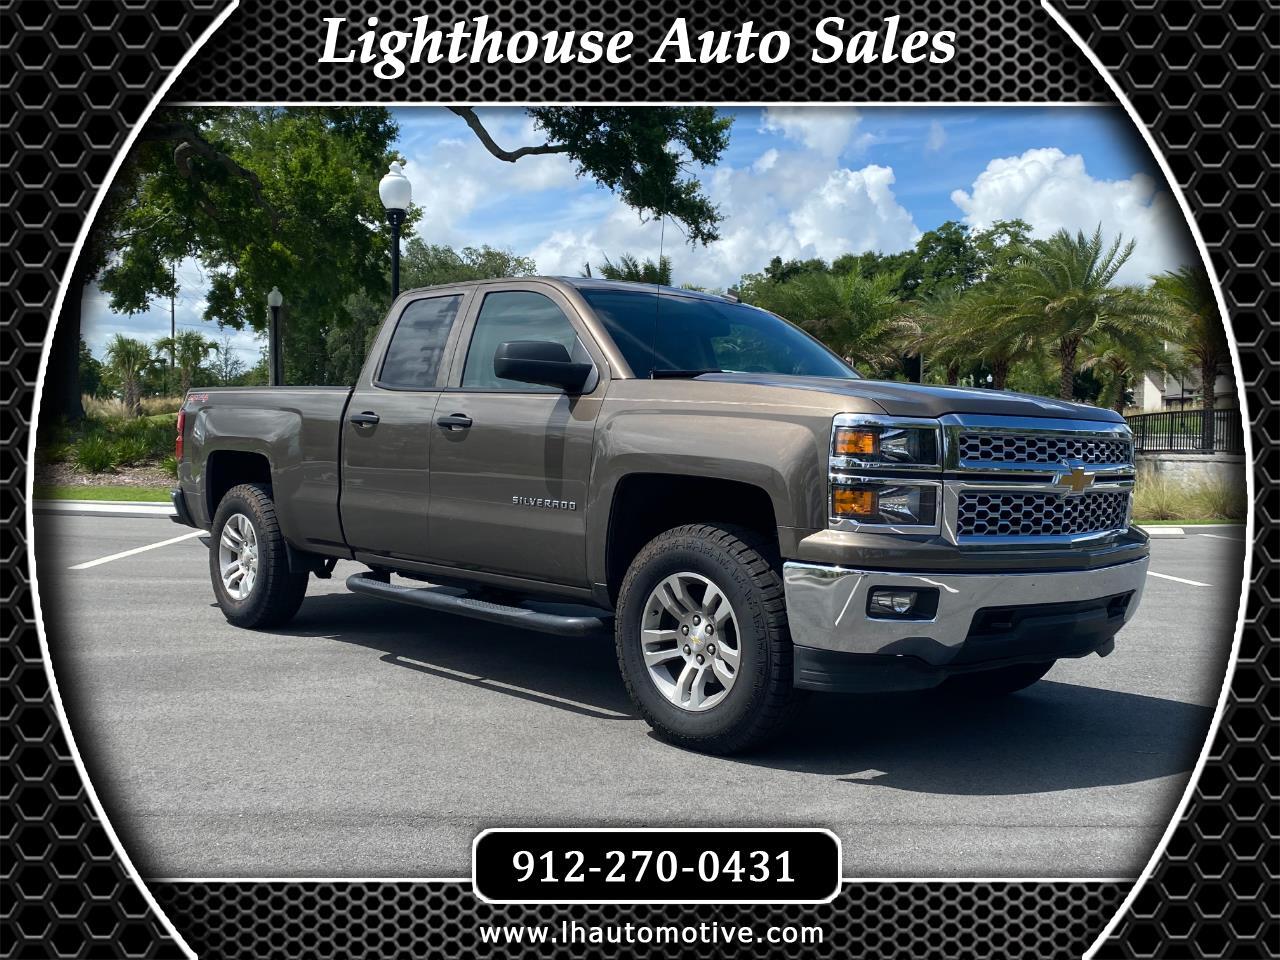 Used 14 Chevrolet Silverado 1500 2lt Double Cab 4wd For Sale In Brunswick Ga 315 Lighthouse Auto Sales